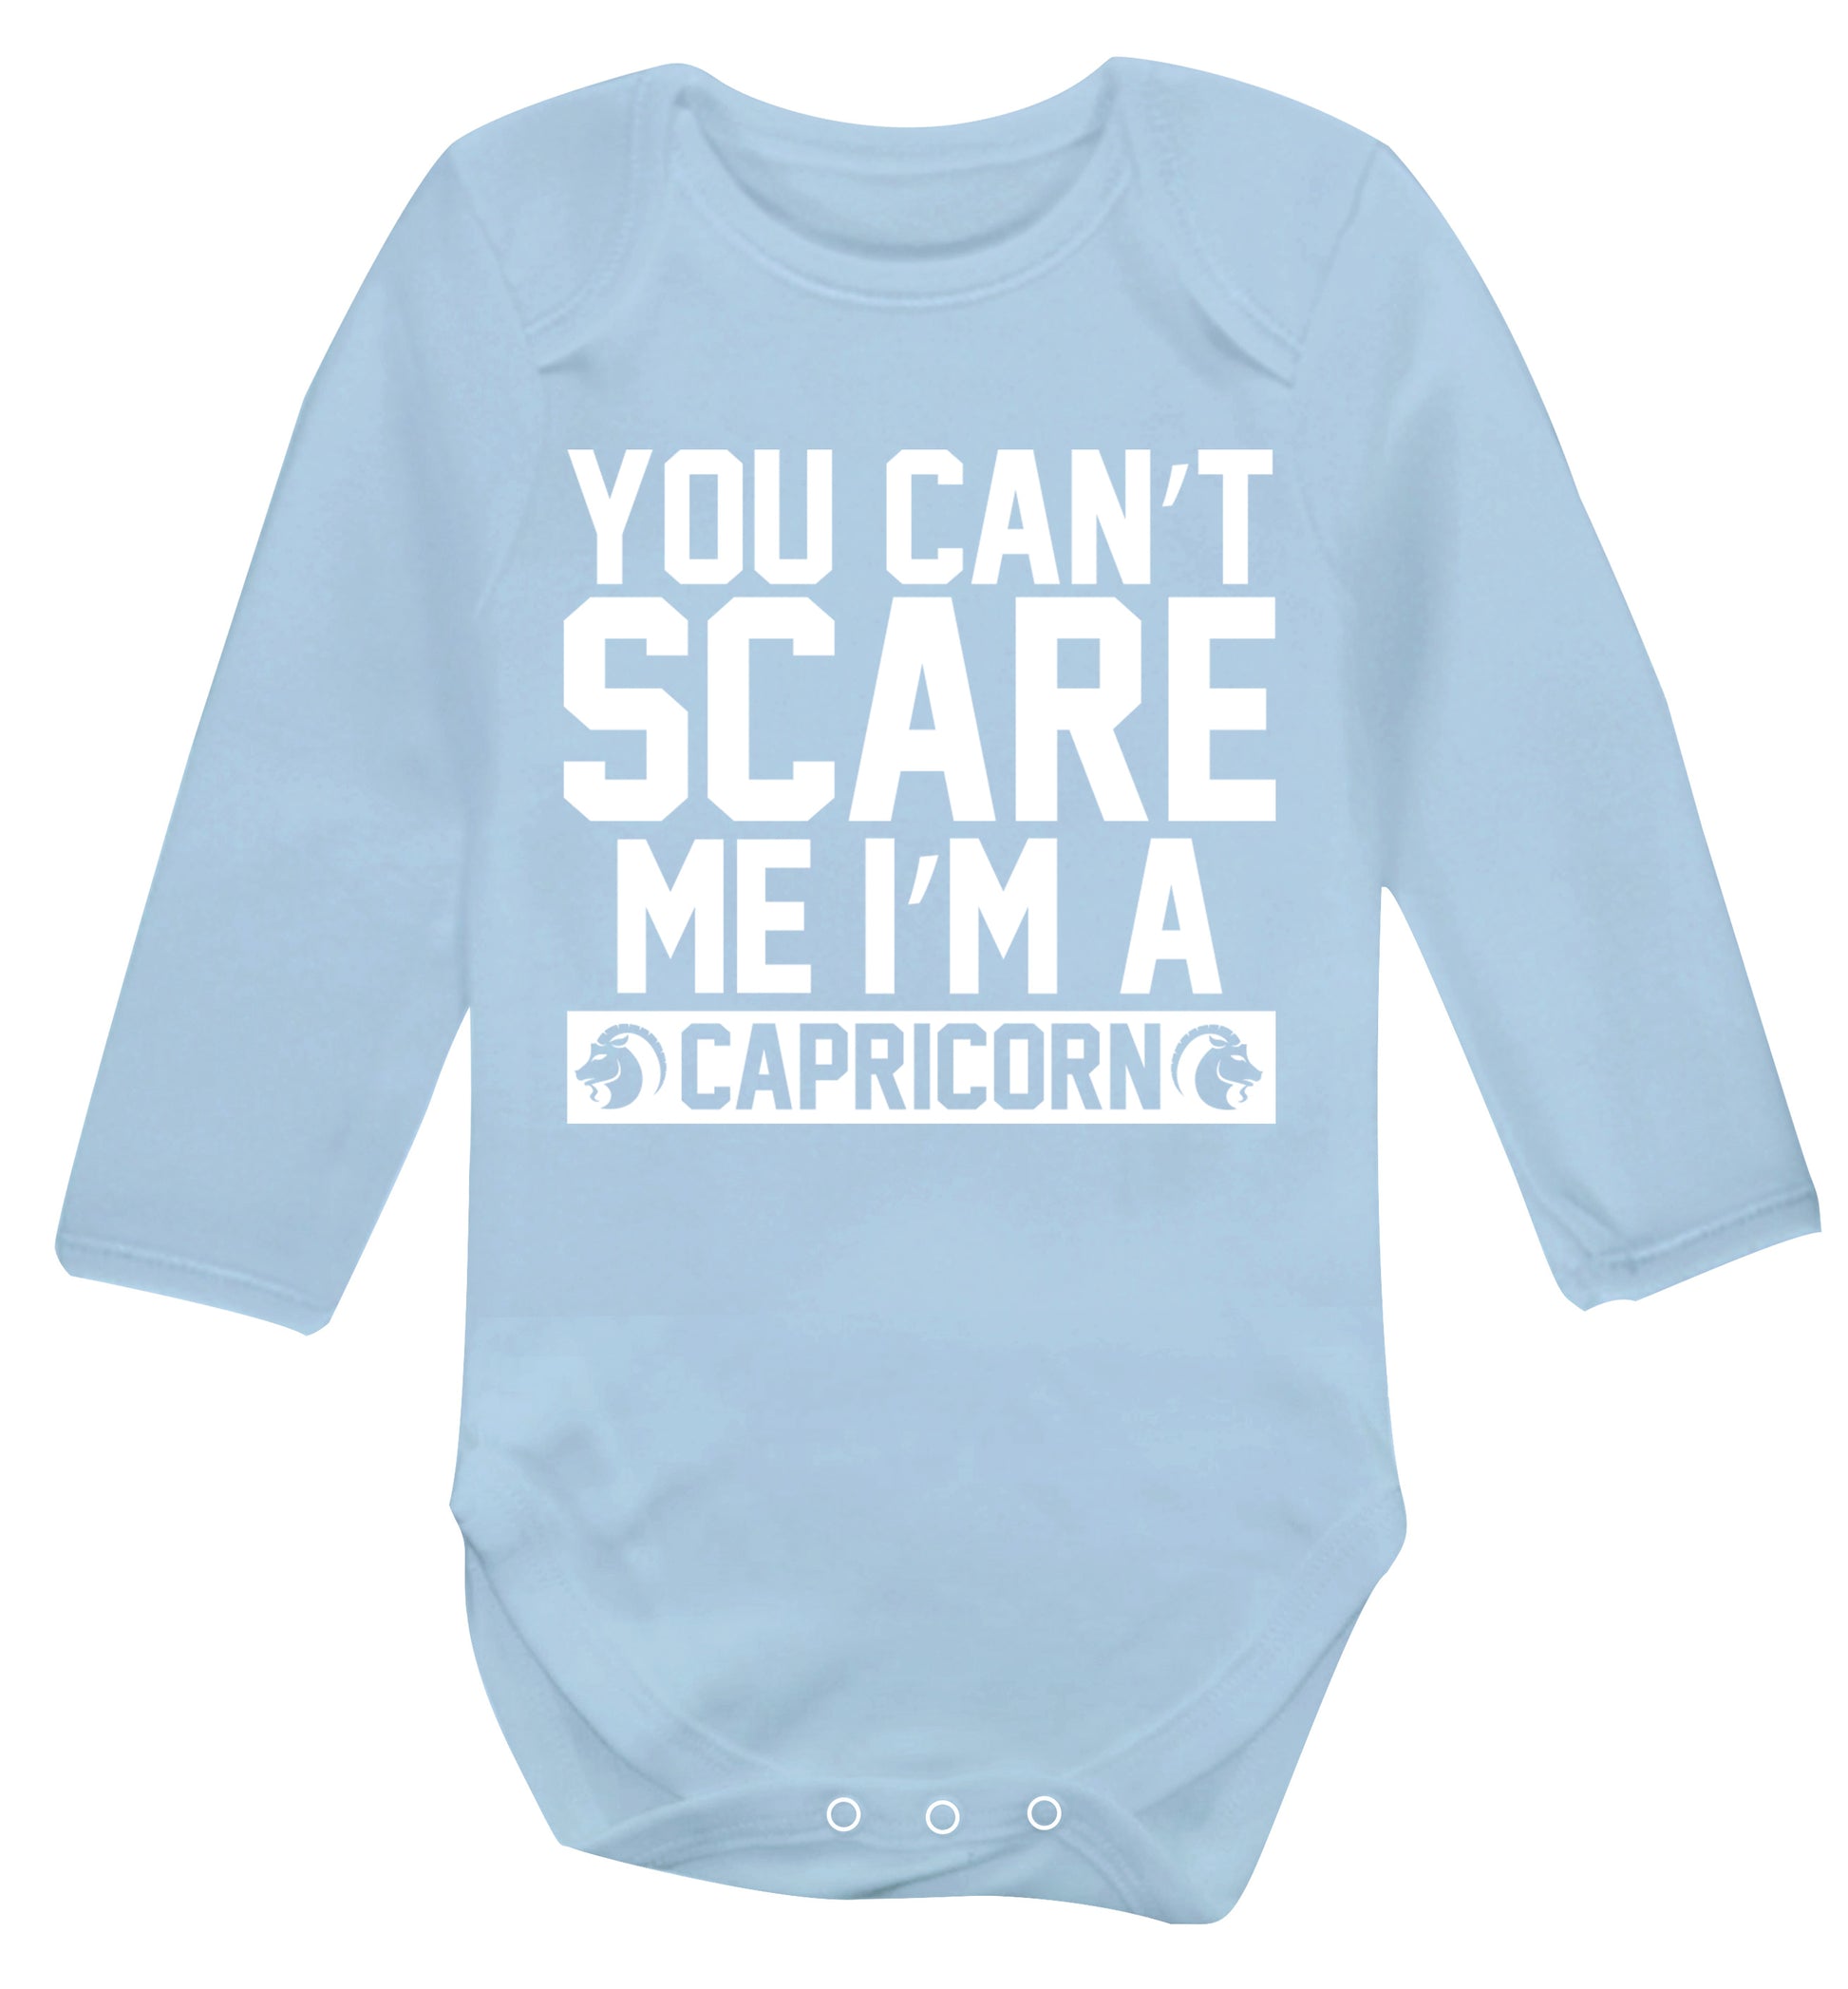 You can't scare me I'm a capricorn Baby Vest long sleeved pale blue 6-12 months